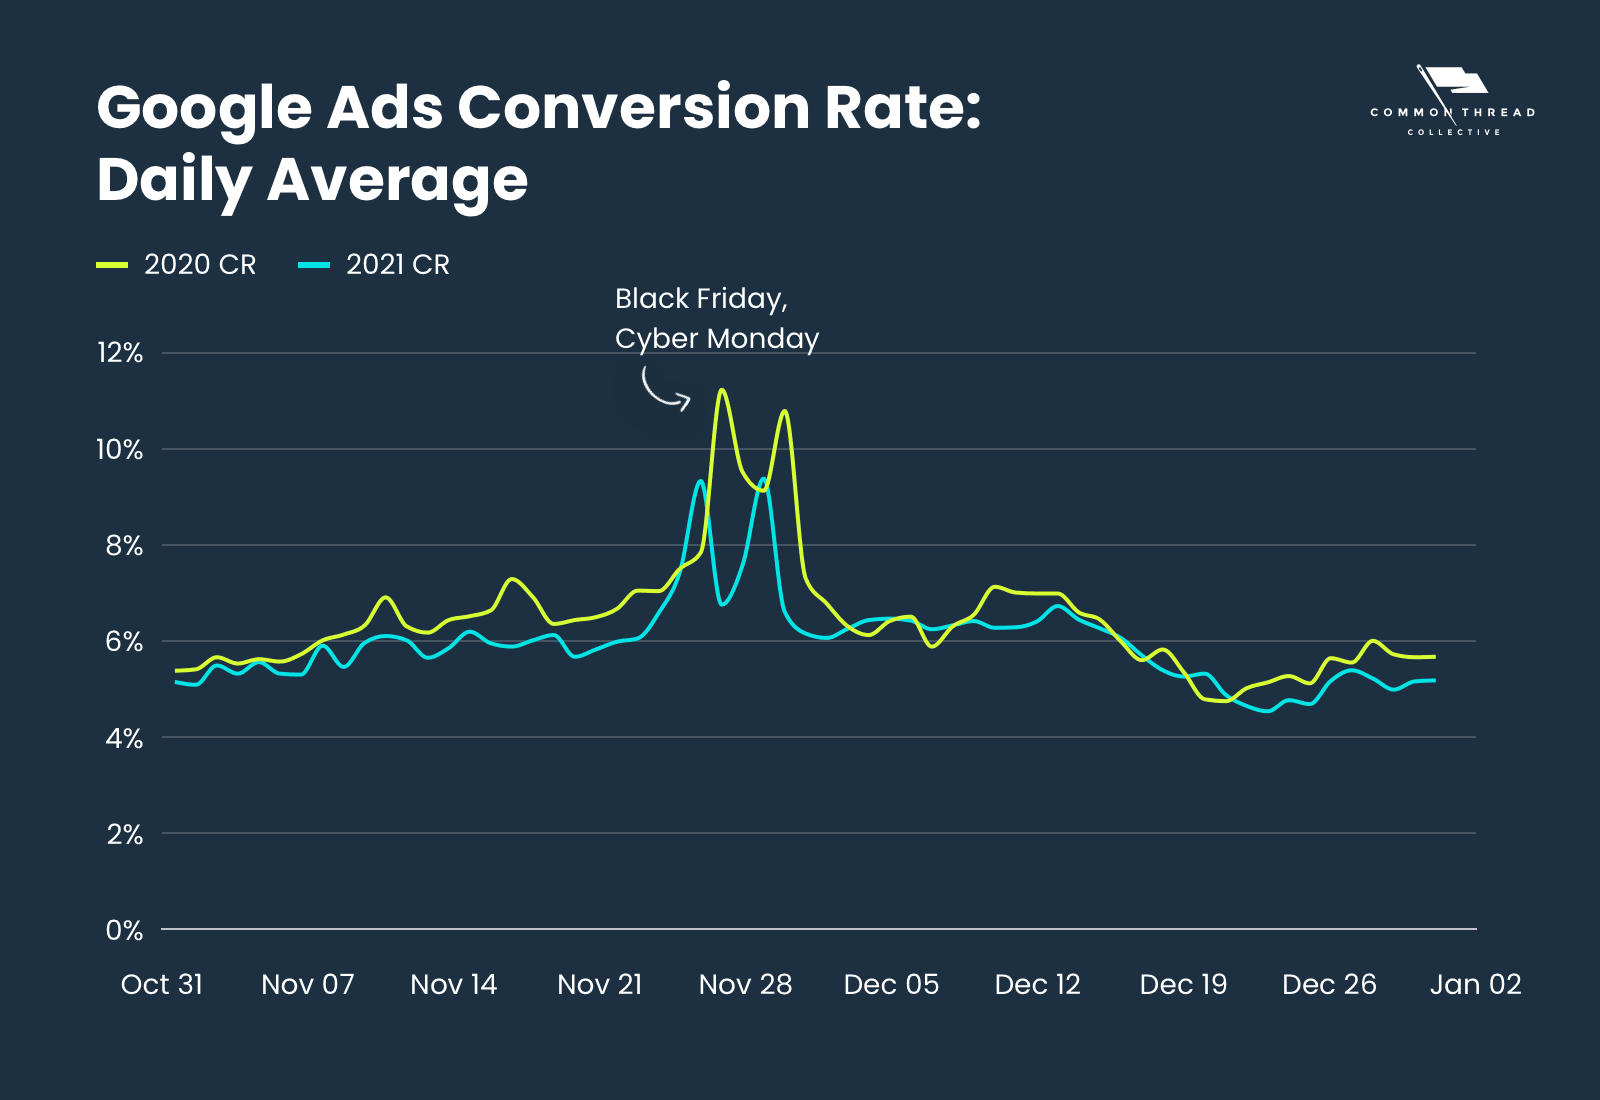 average Google ads conversion rate is higher during the holidays for ecommerce brands than during any other point in the year